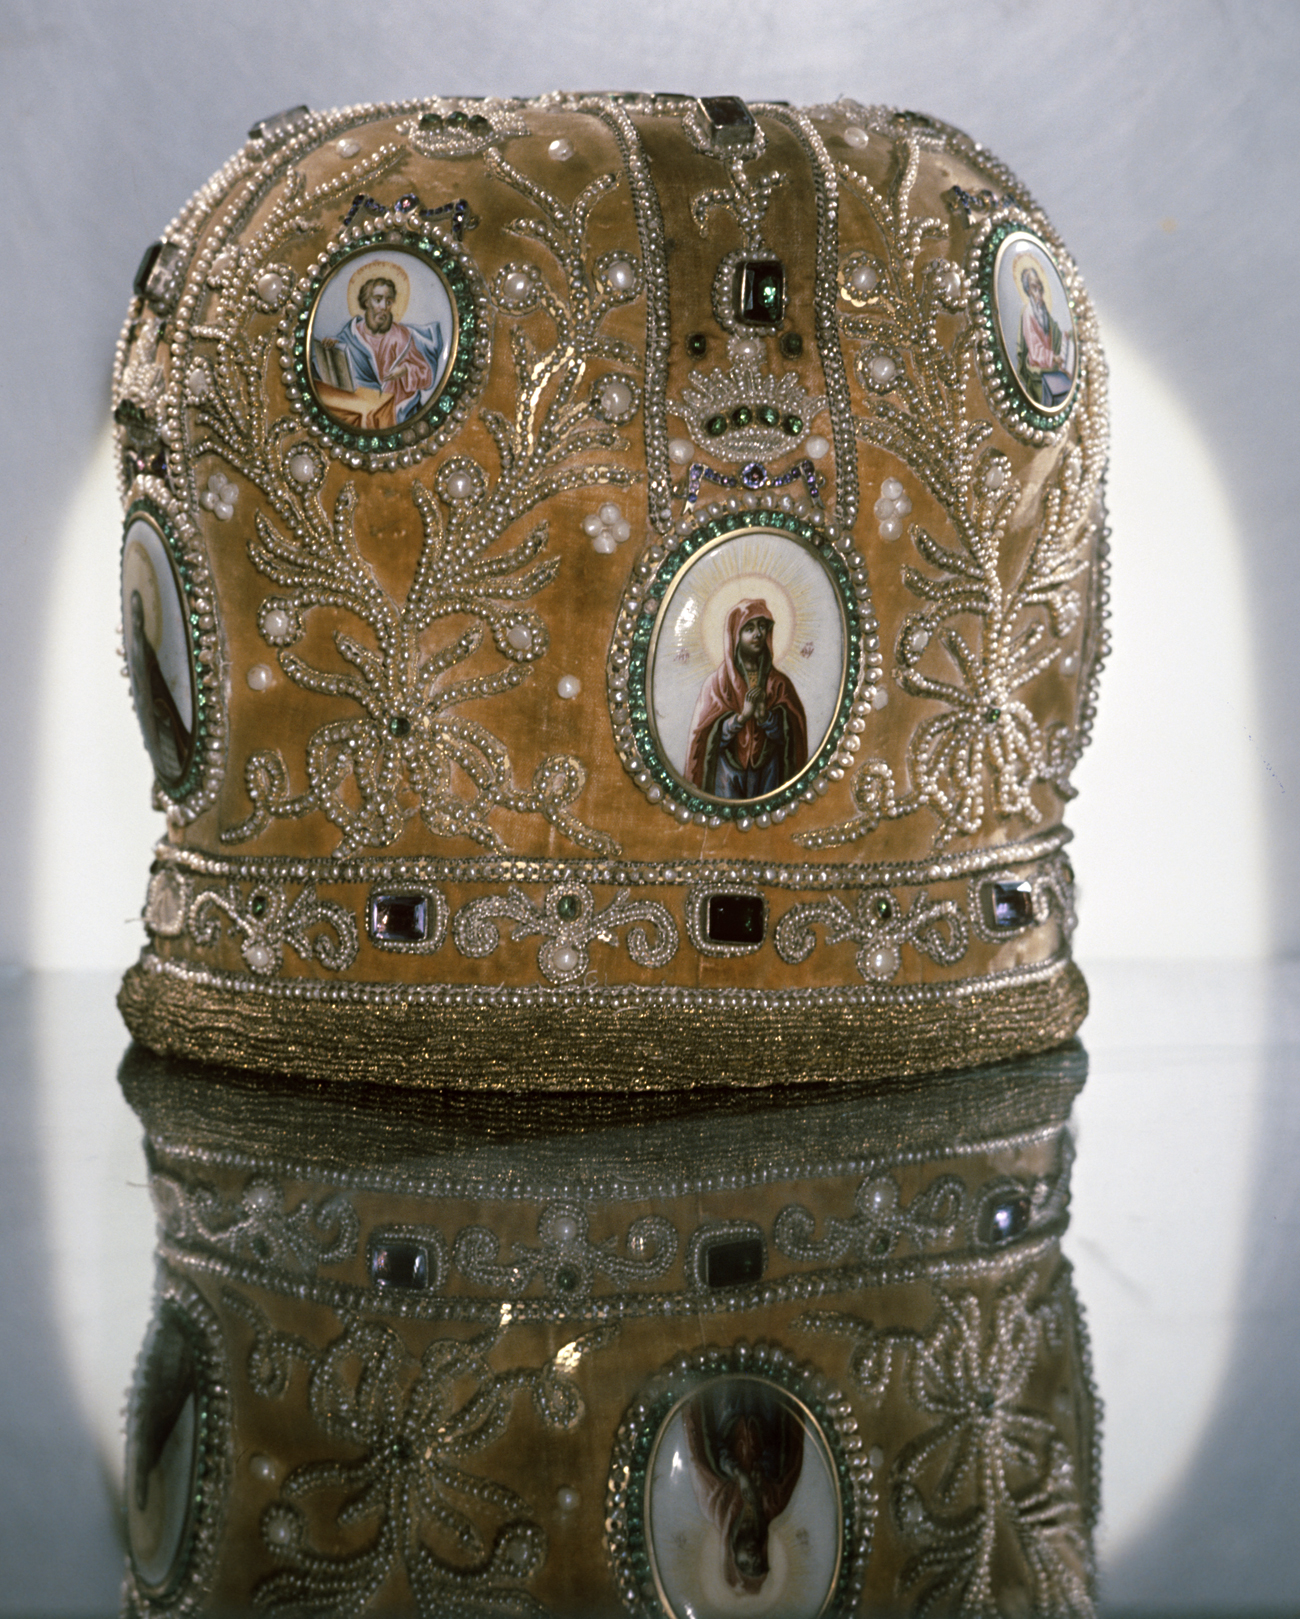 Miter decorated with miniature enamel icons, gems and pearls. 19th century. The Rostov Kremlin museum reserve. Source: Vsevolod Tarasevich / RIA Novosti